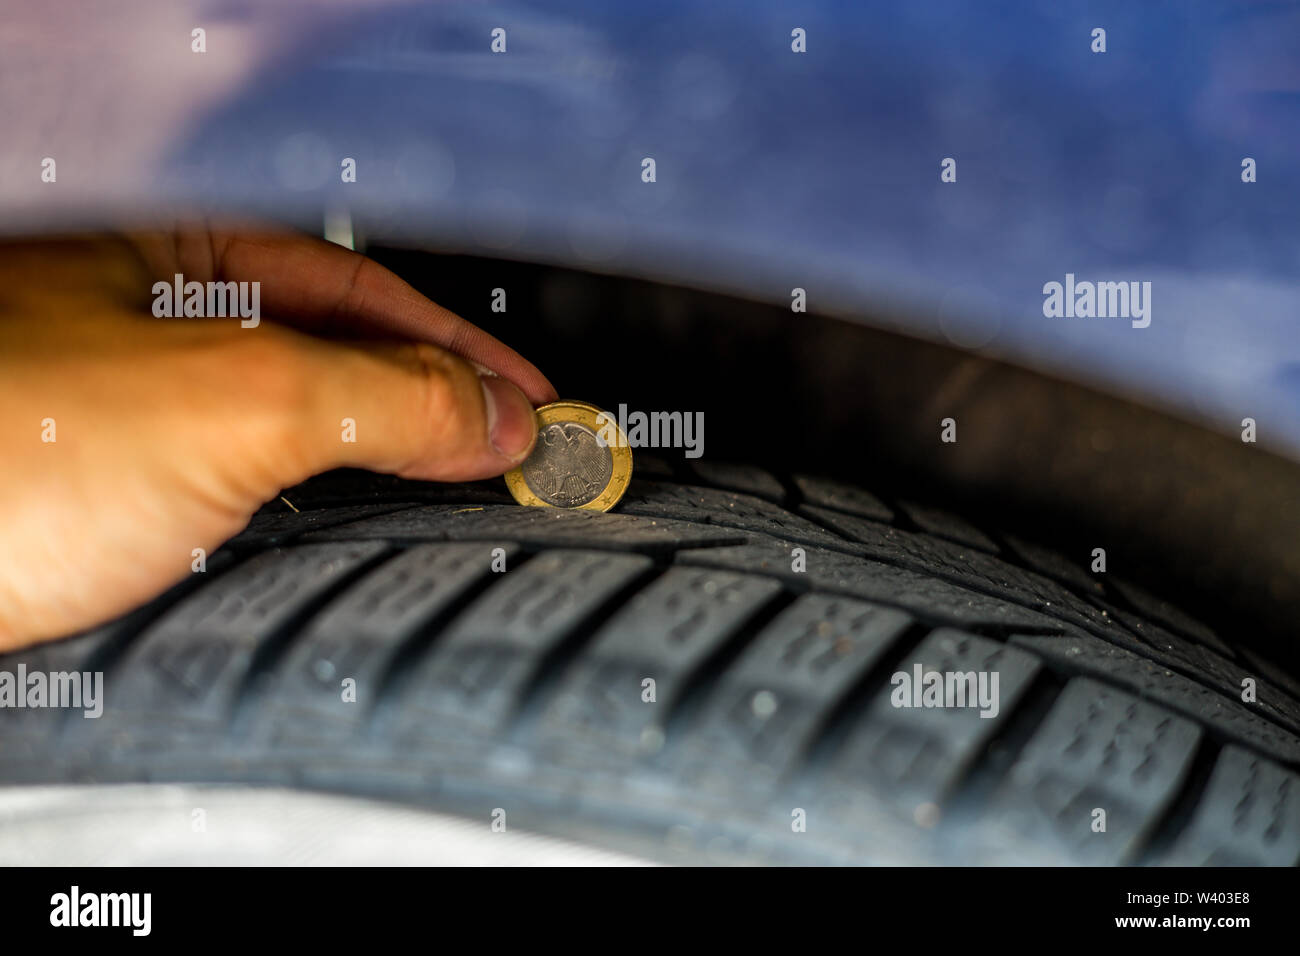 Control of the car tire profile with a one euro coin Stock Photo